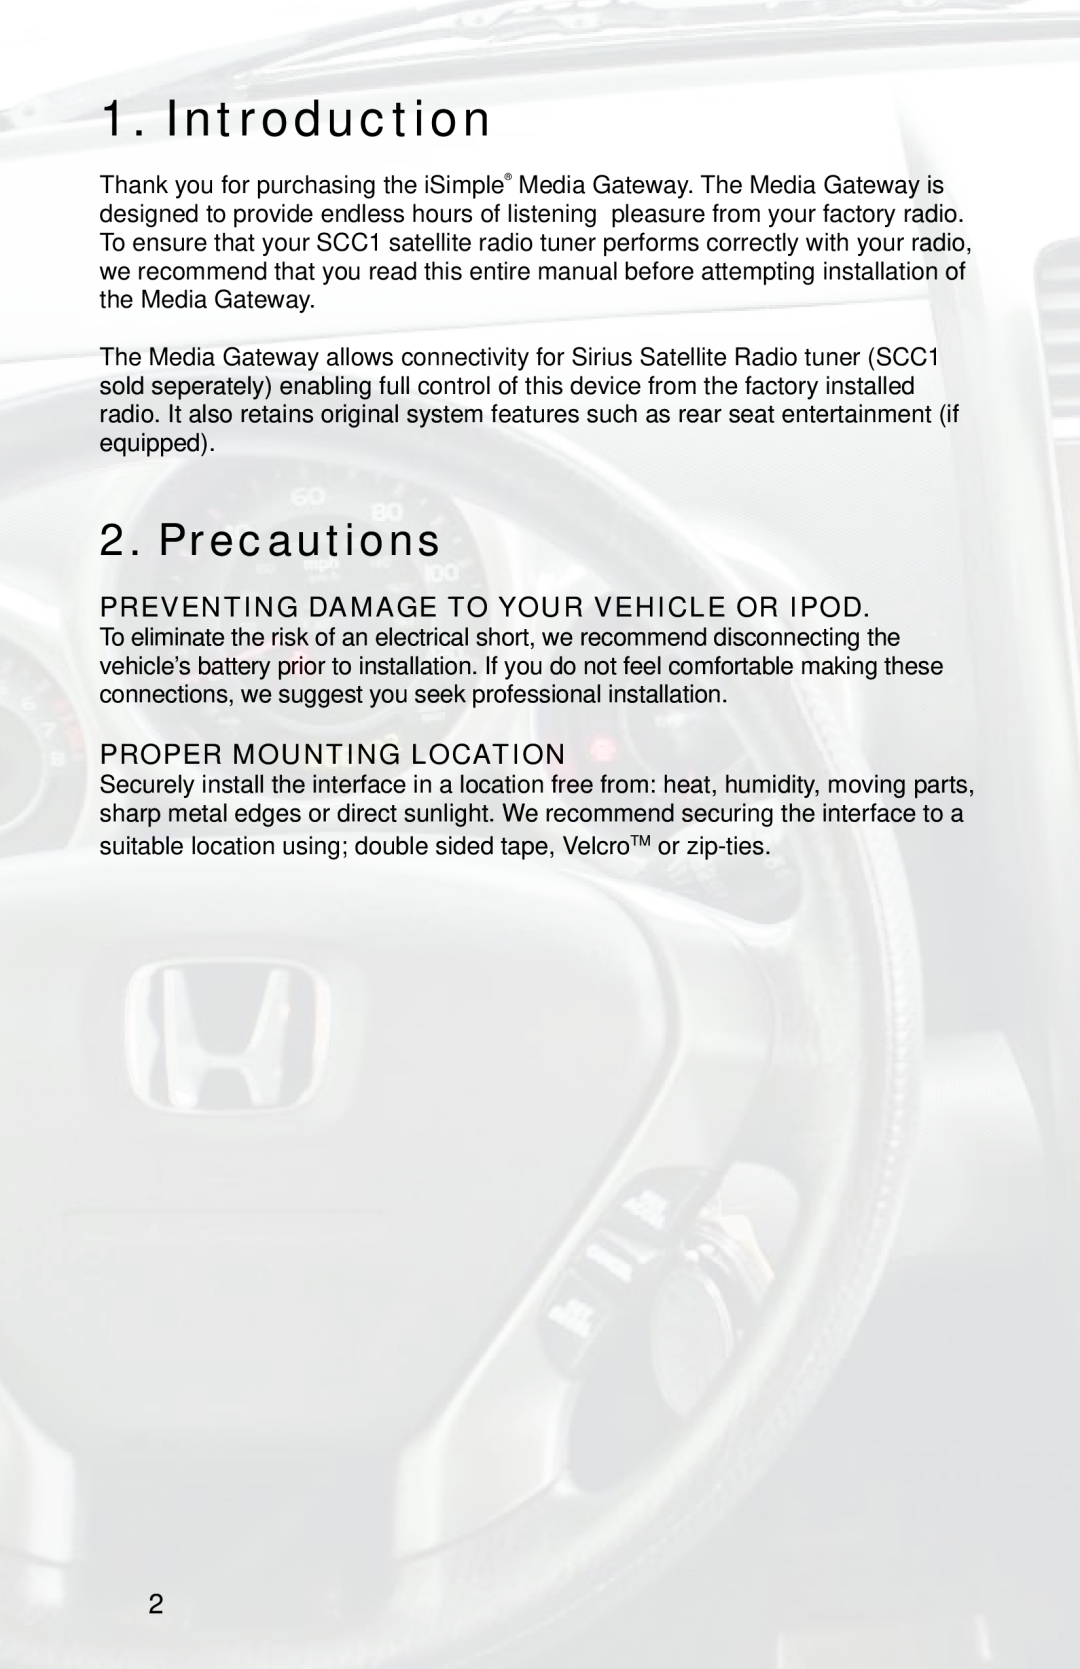 iSimple PGHHD1, ISHD11 Introduction, Precautions, PREVENTING DAMAGE TO YOUR VEHICLE OR iPod, Proper Mounting Location 